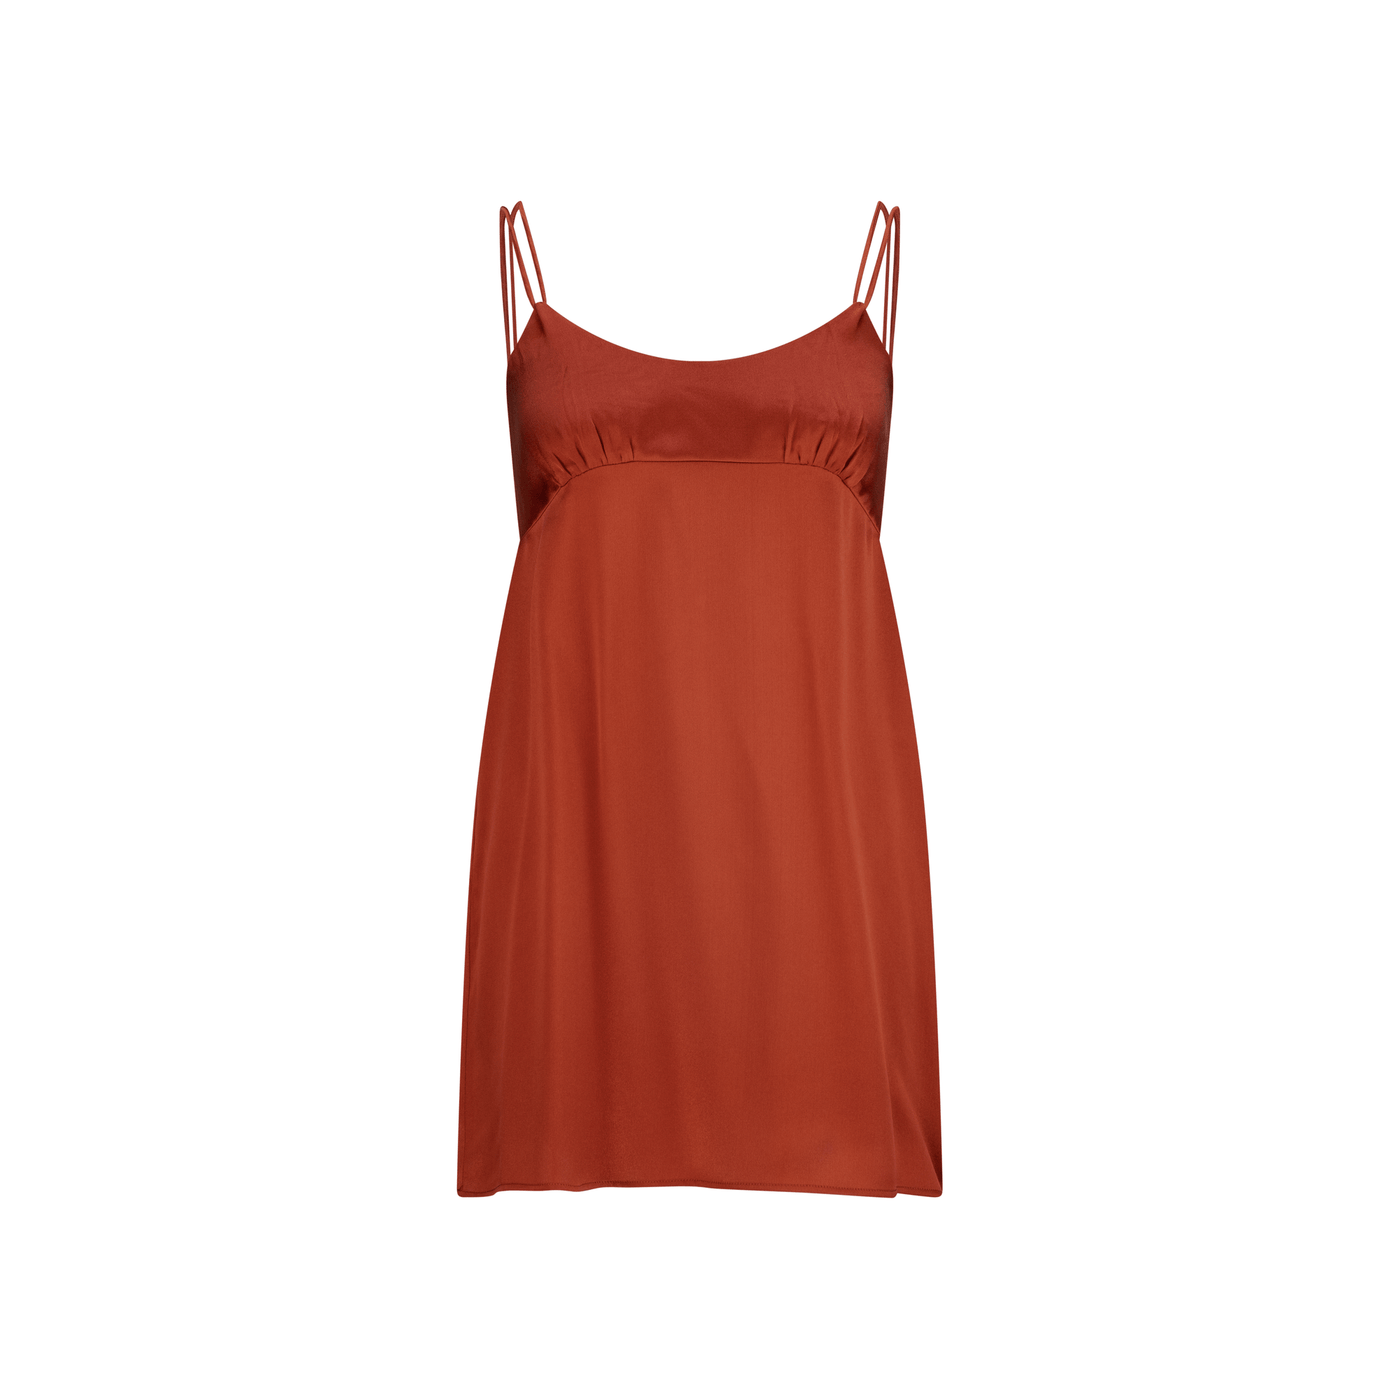 Lilly Pilly Collection bluesign® certified silk Ella Slip in Rust, as a 3D image of front view